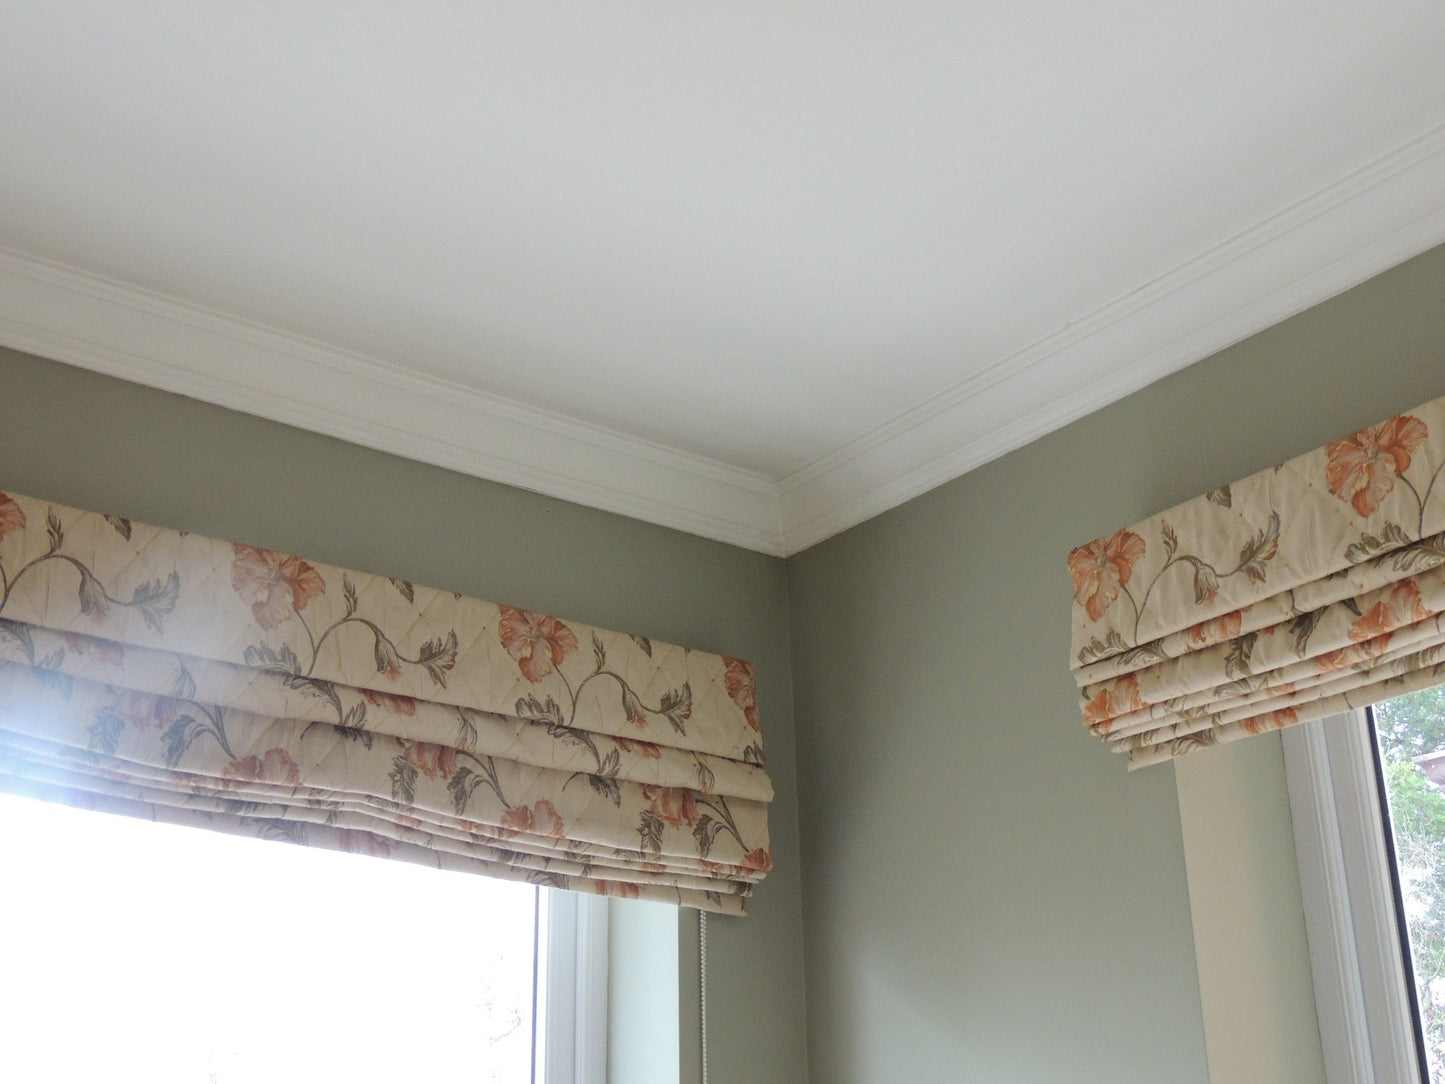 Crown - Classic Coving installed above a window